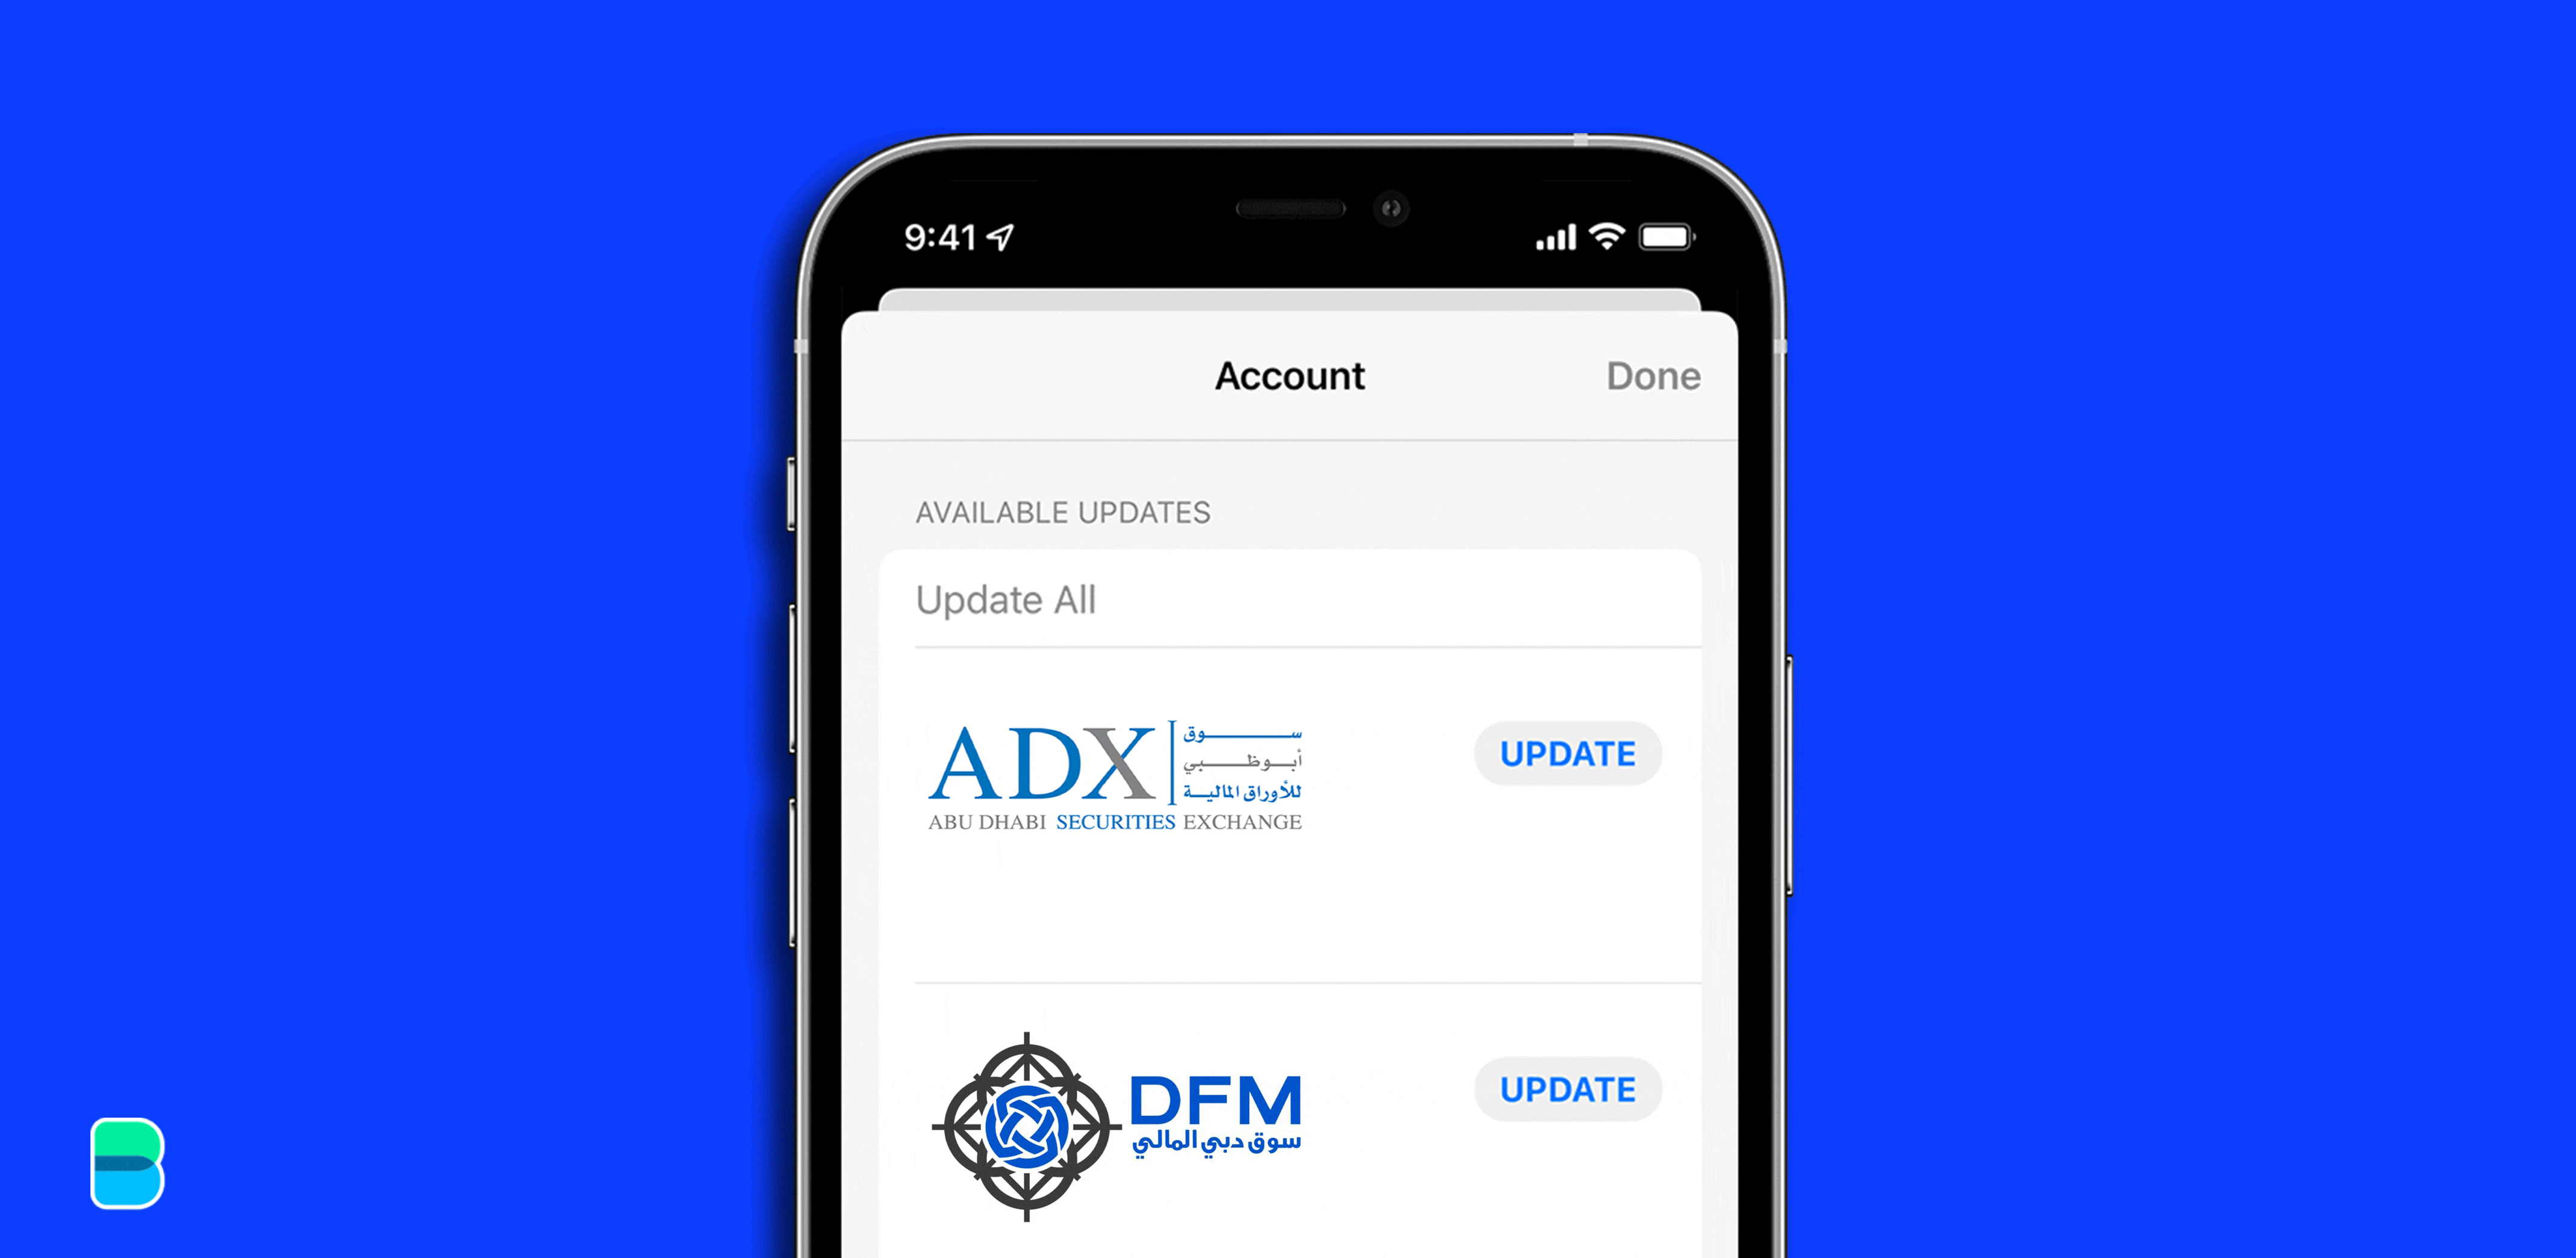 ADX and DFM have some updates